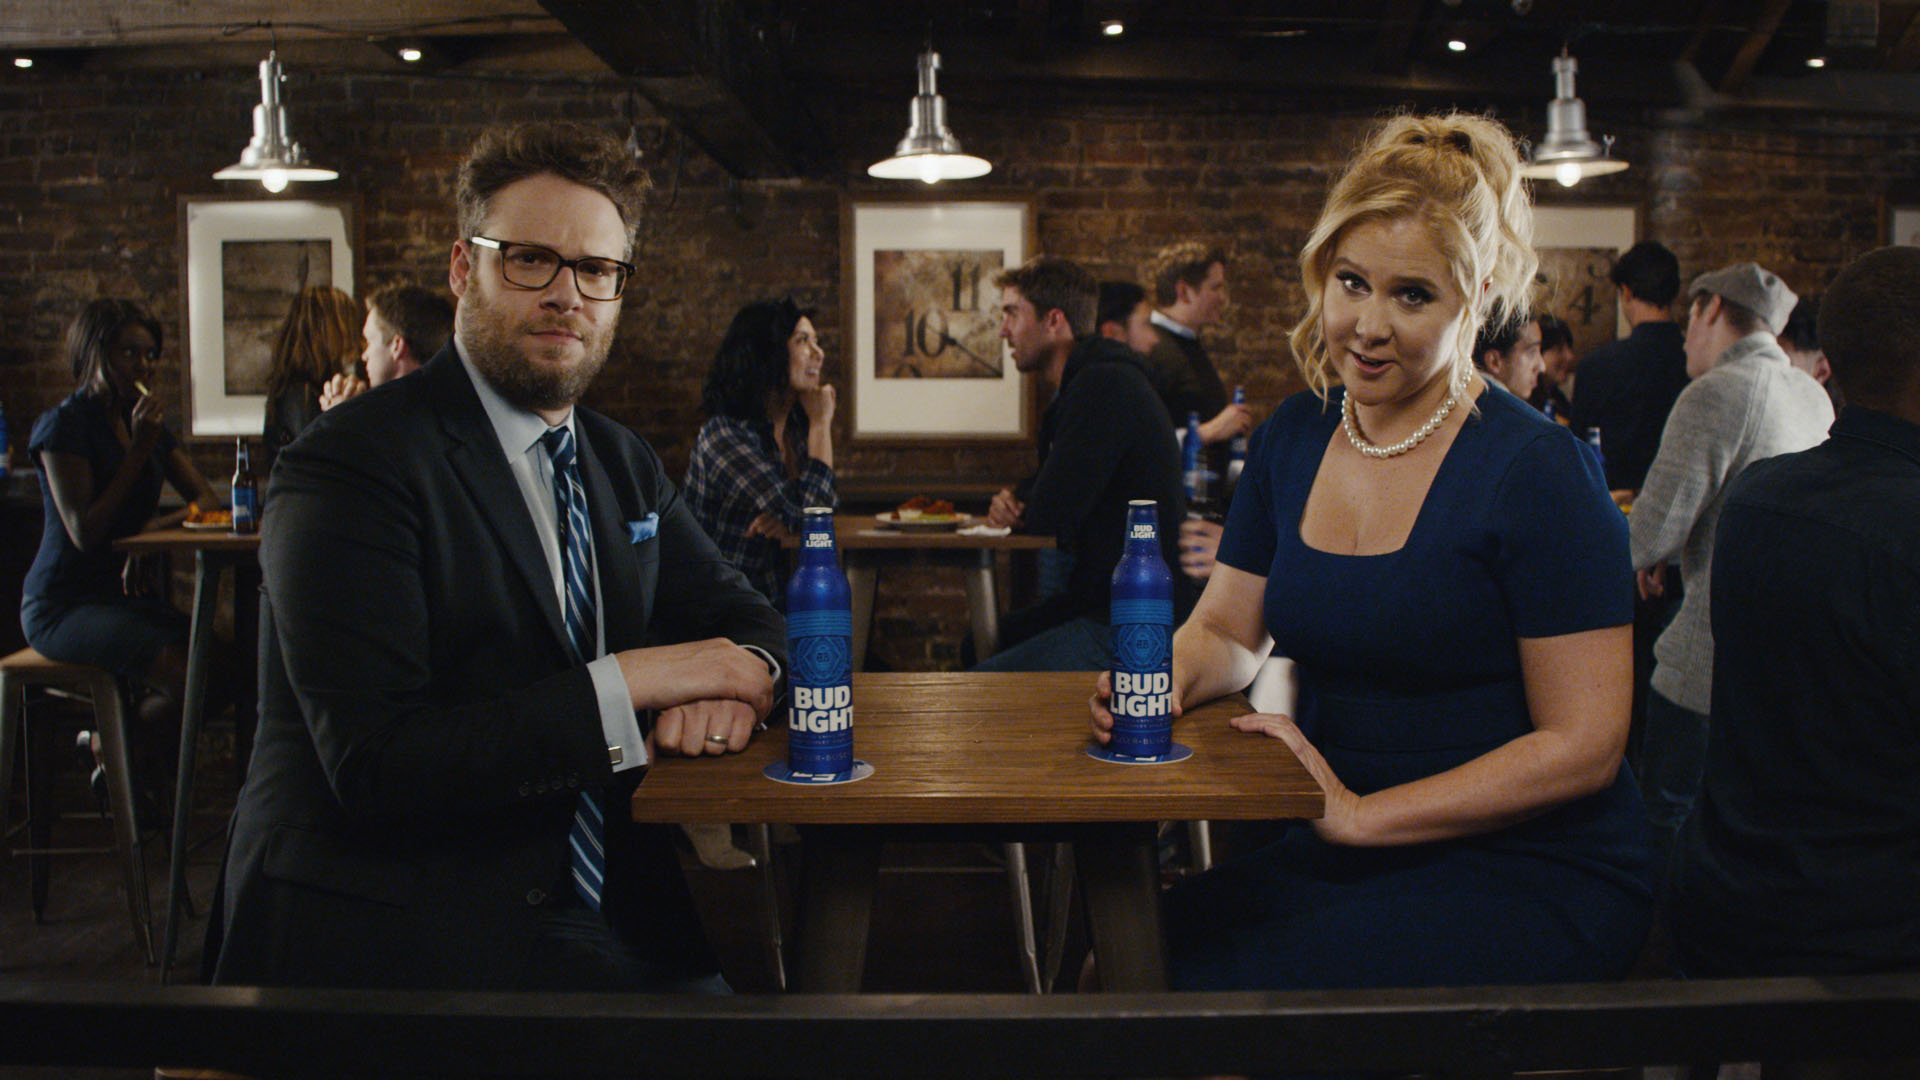 Bud Light Highlights Equal Pay In Newest Campaign Spot